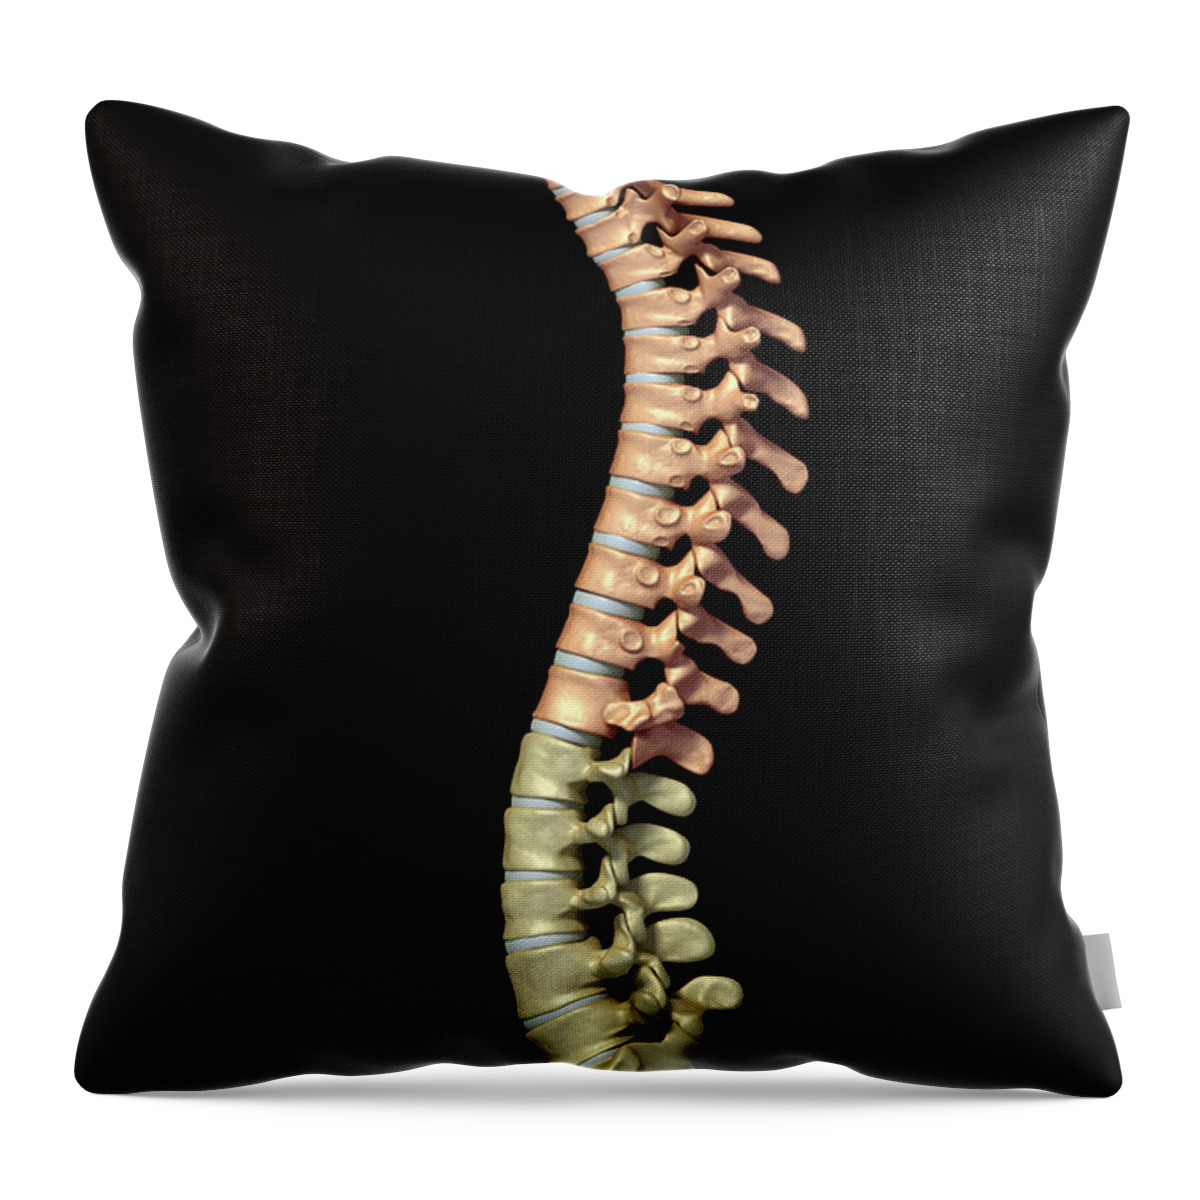 Digitally Generated Image Throw Pillow featuring the photograph The Thoracic Vertebrae #1 by Science Picture Co